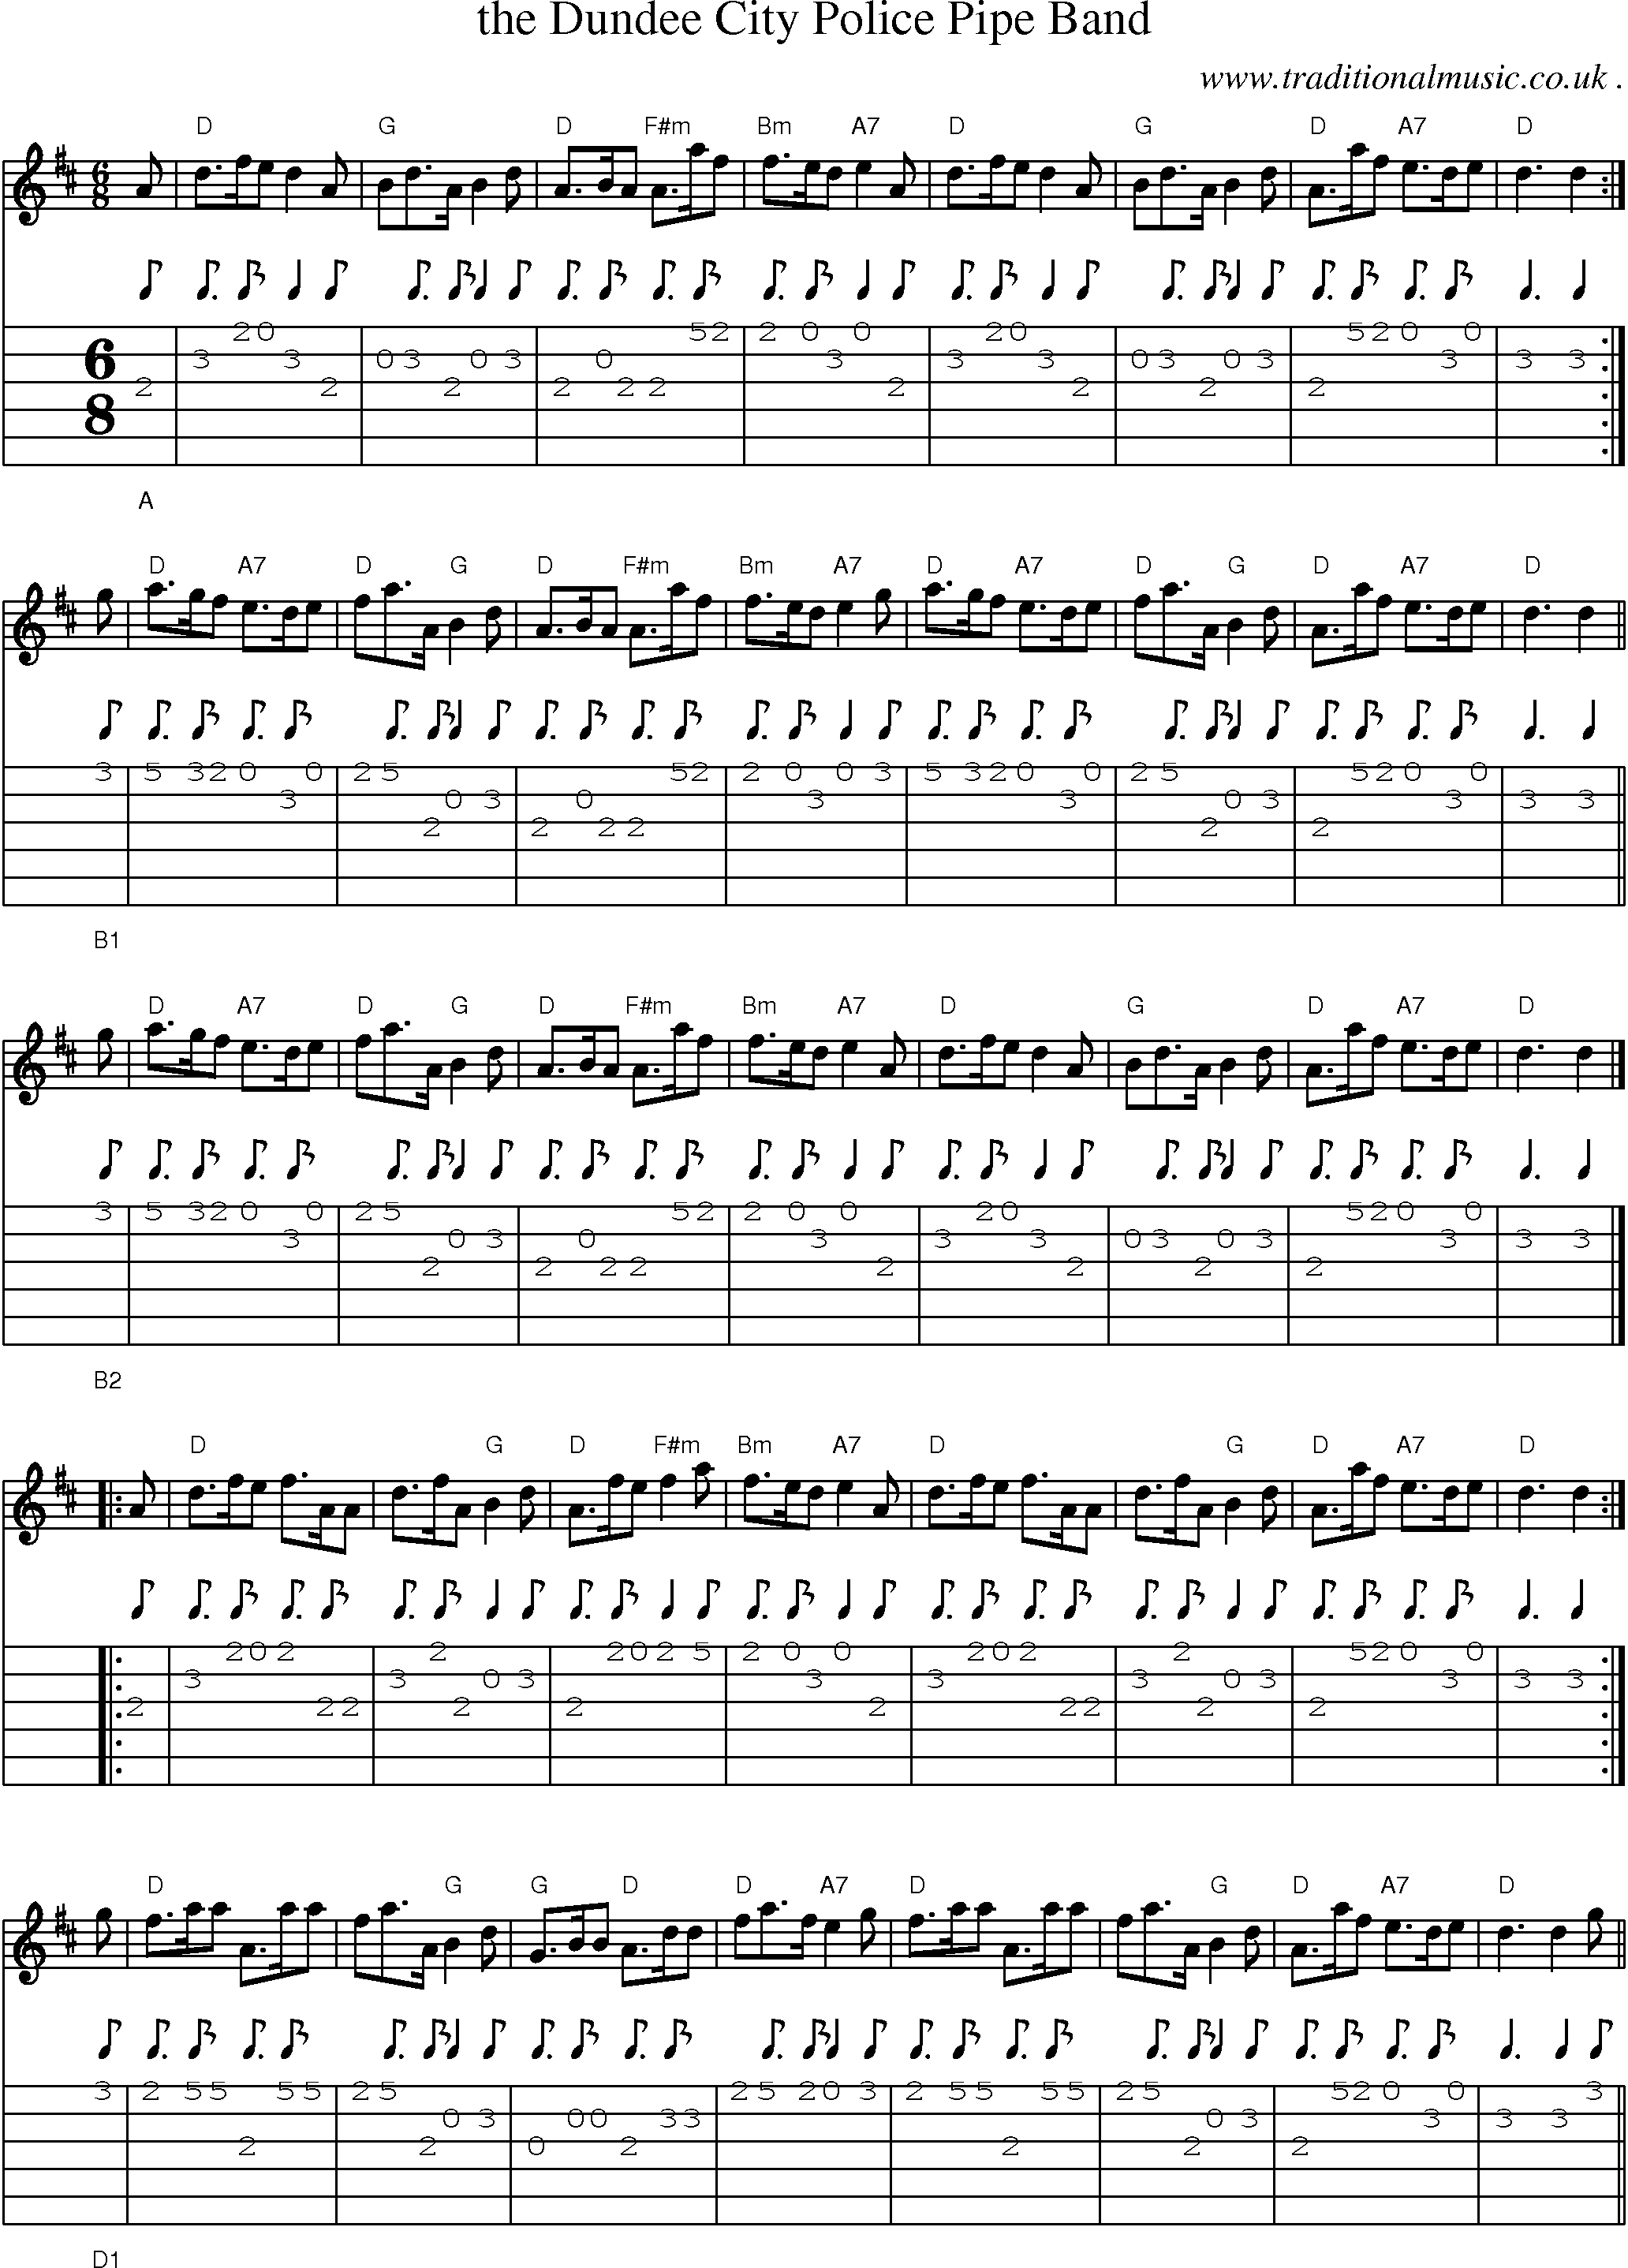 Sheet-music  score, Chords and Guitar Tabs for The Dundee City Police Pipe Band